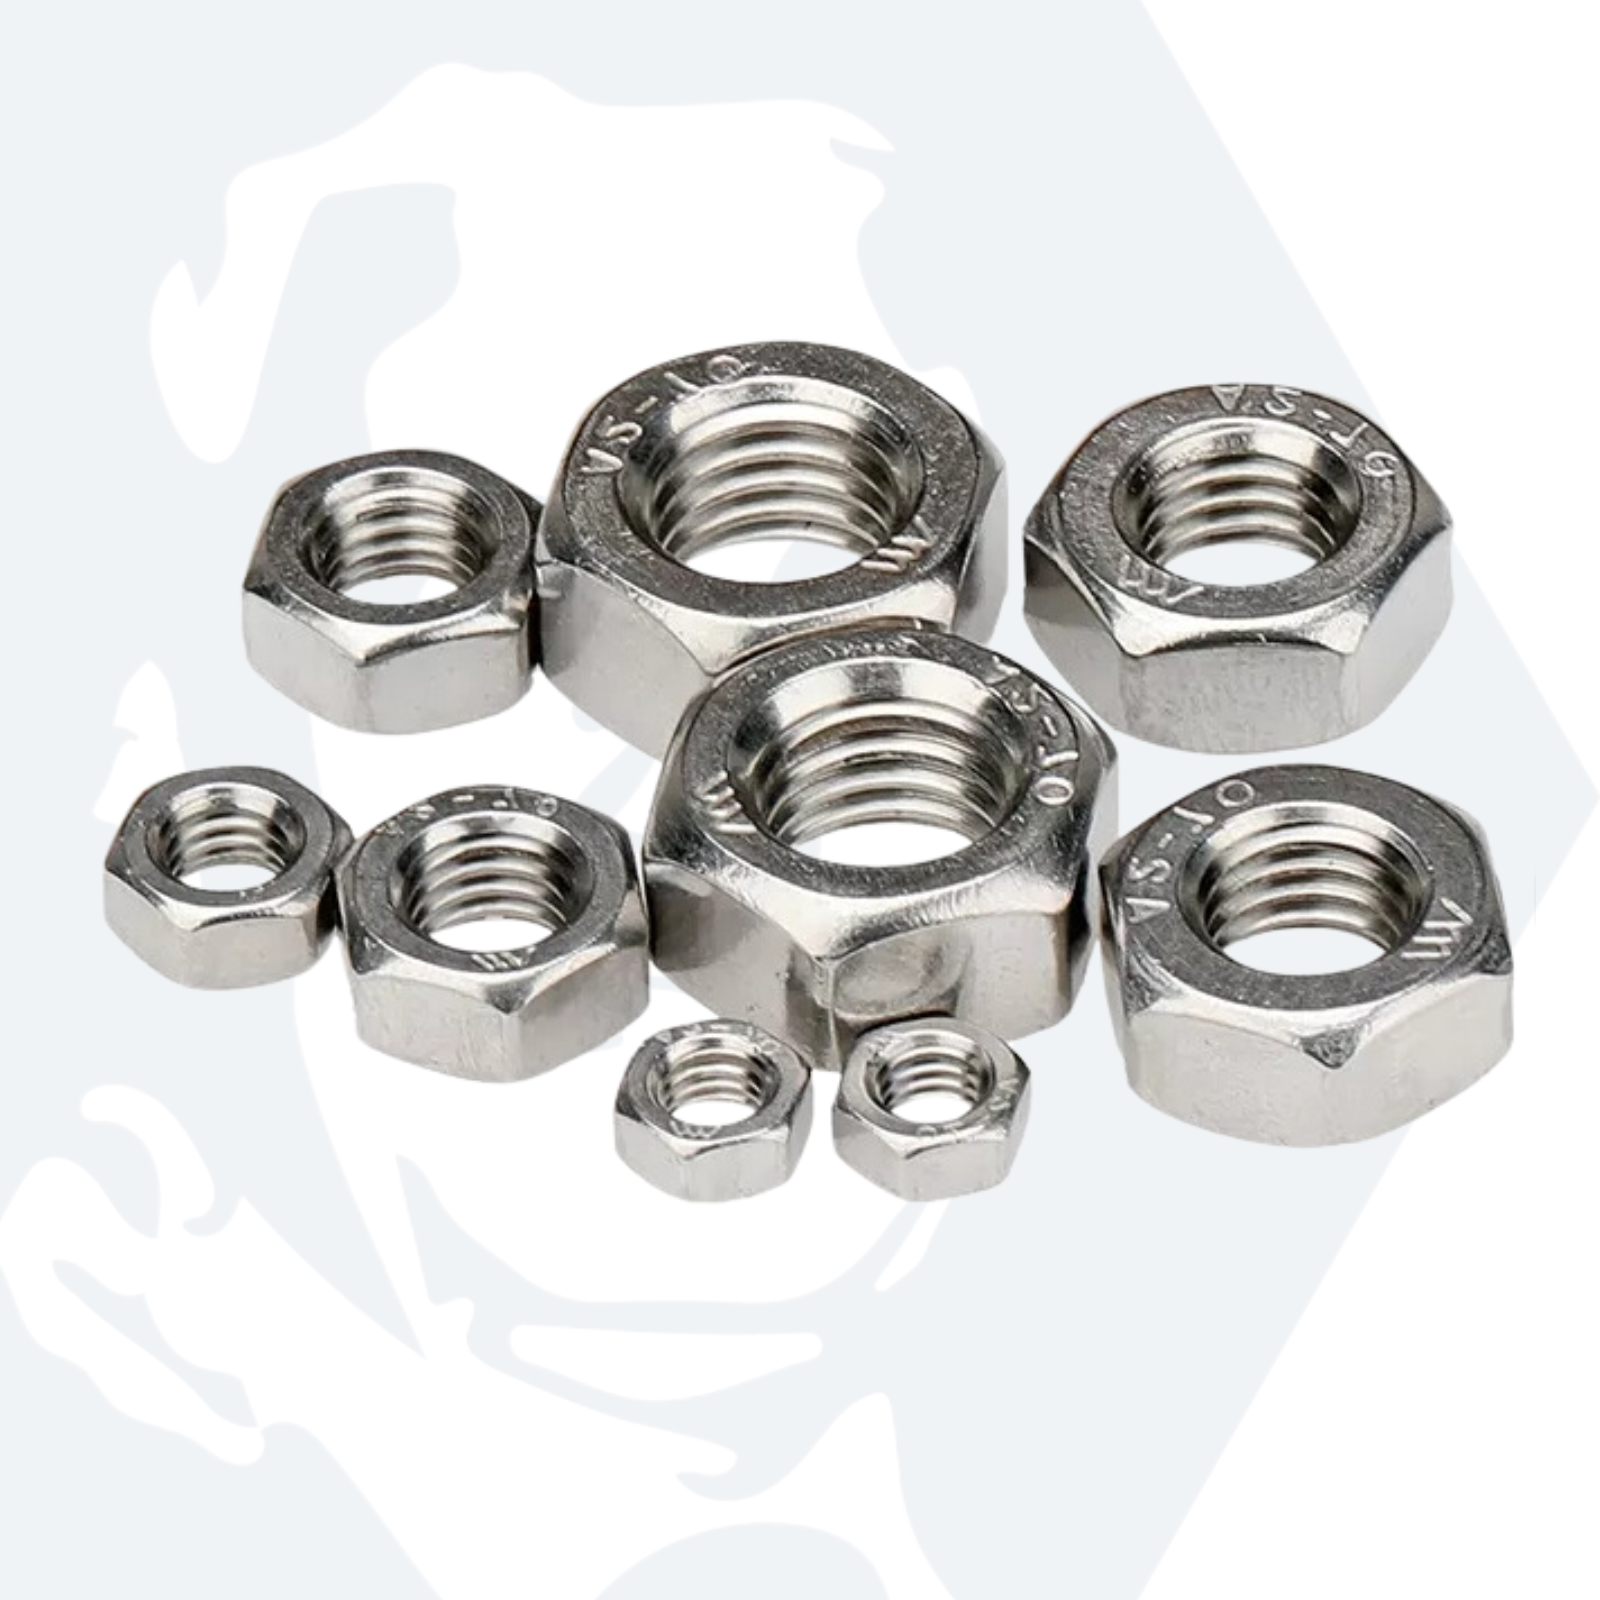 M7 Hexagon Nuts (DIN 934) - Stainless Steel (A4)